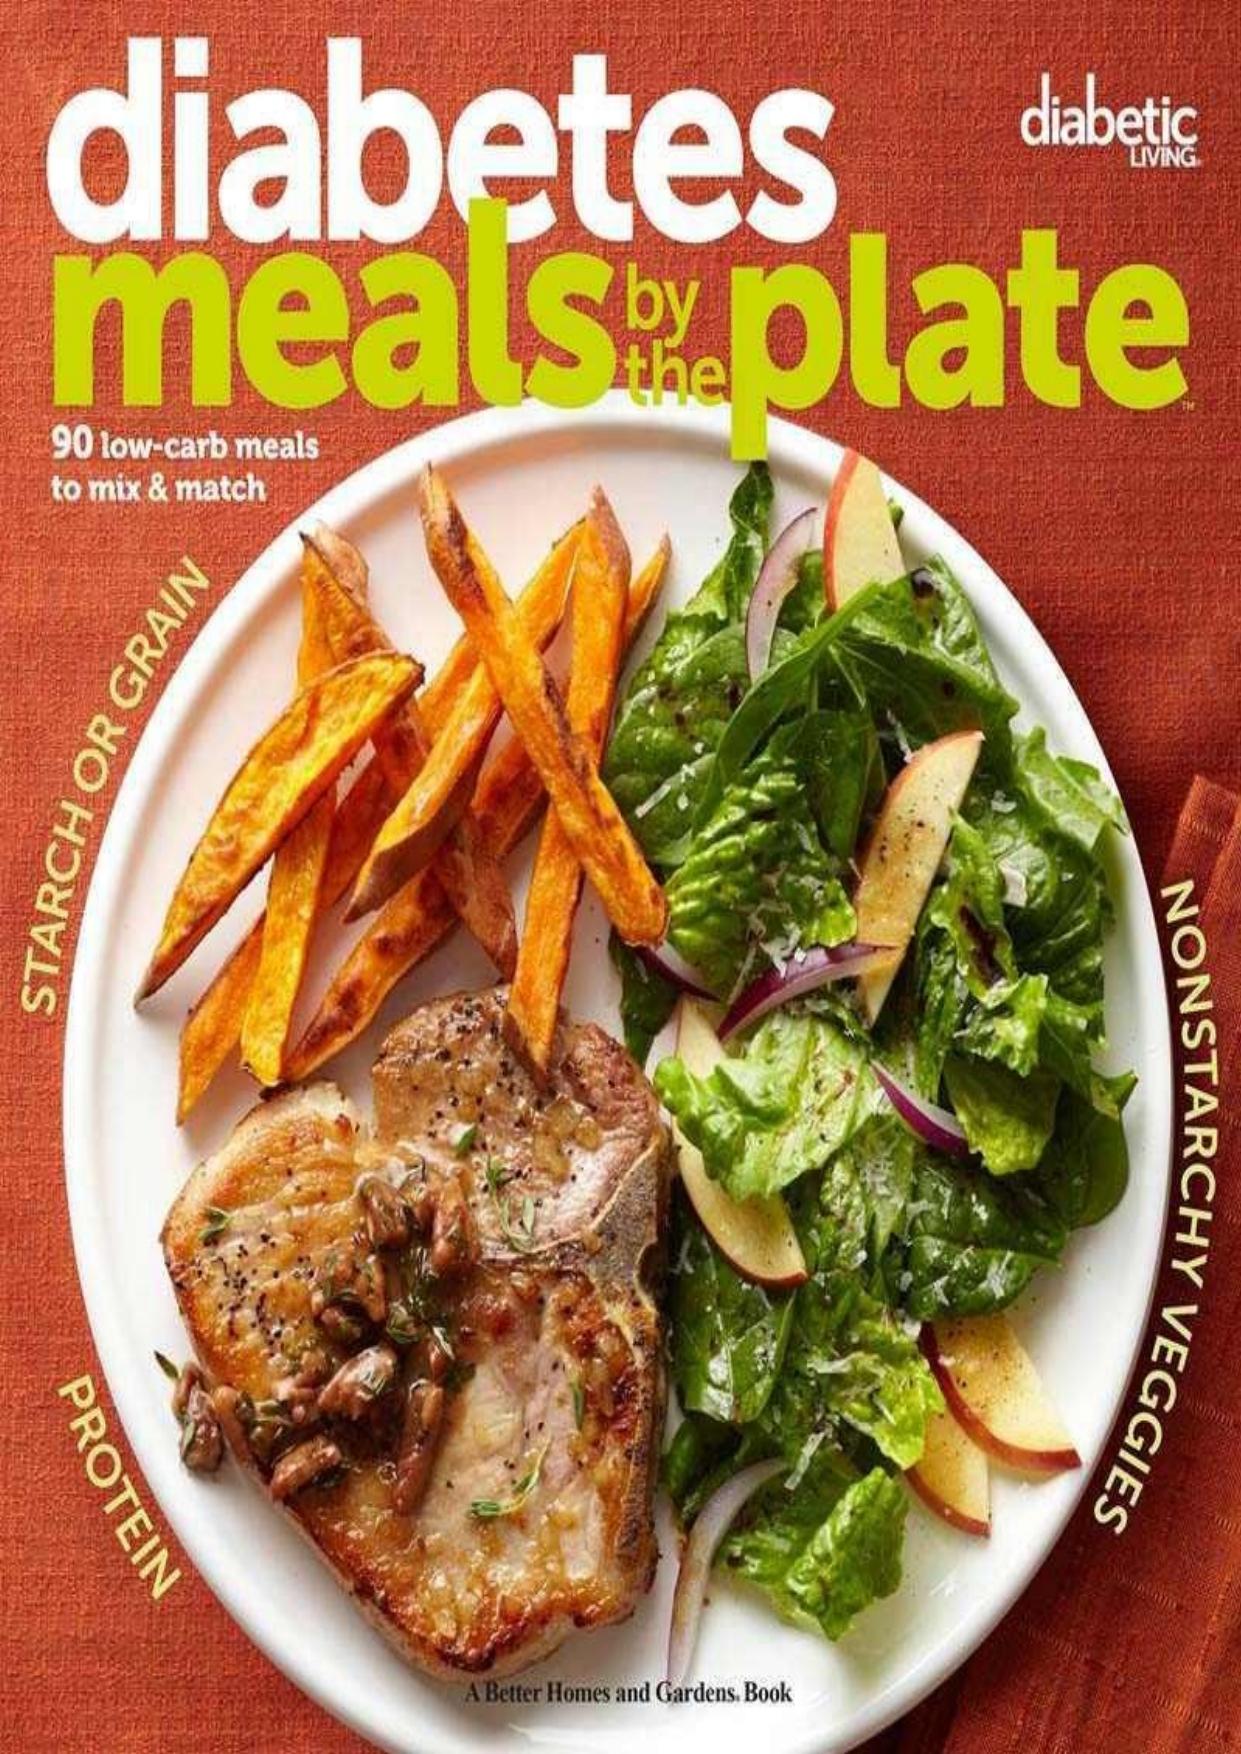 Diabetic Living Diabetes Meals by the Plate: 90 Low-Carb Meals to Mix & Match by Diabetic Living Editors